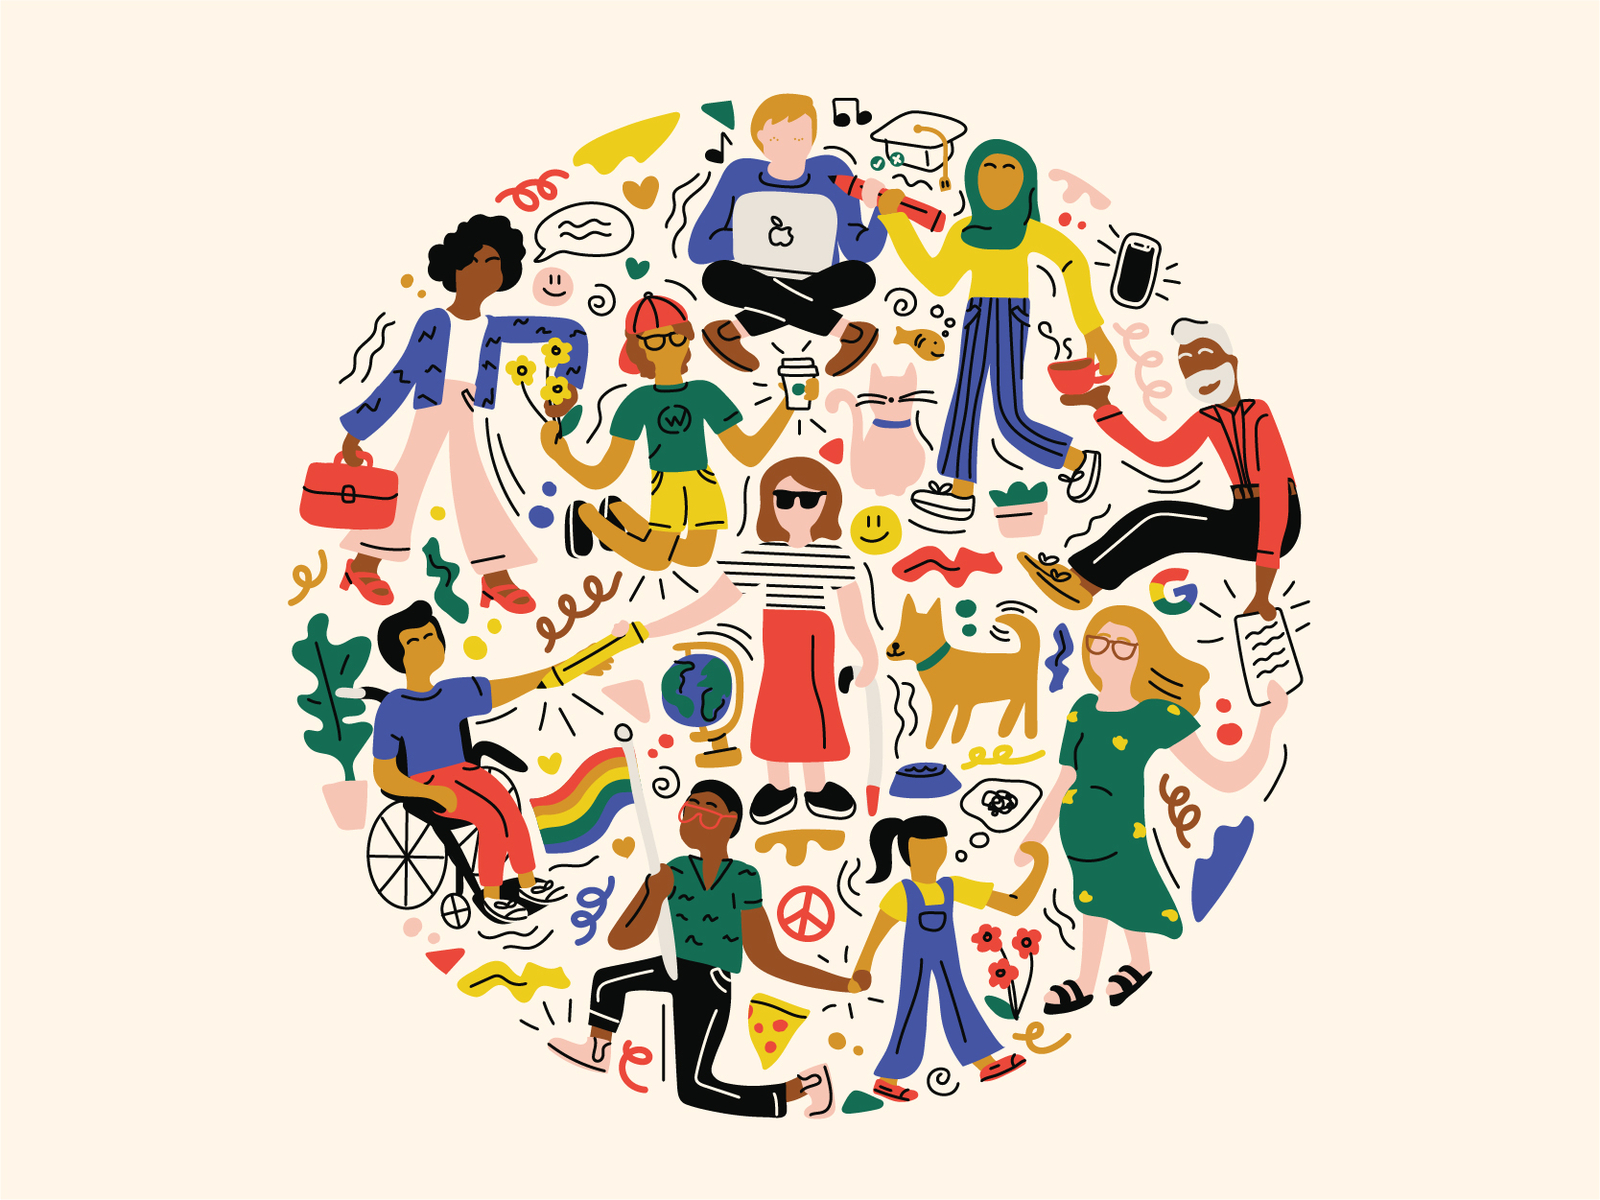 Everyone is Welcome Here by Hannah Largen for WillowTree on Dribbble